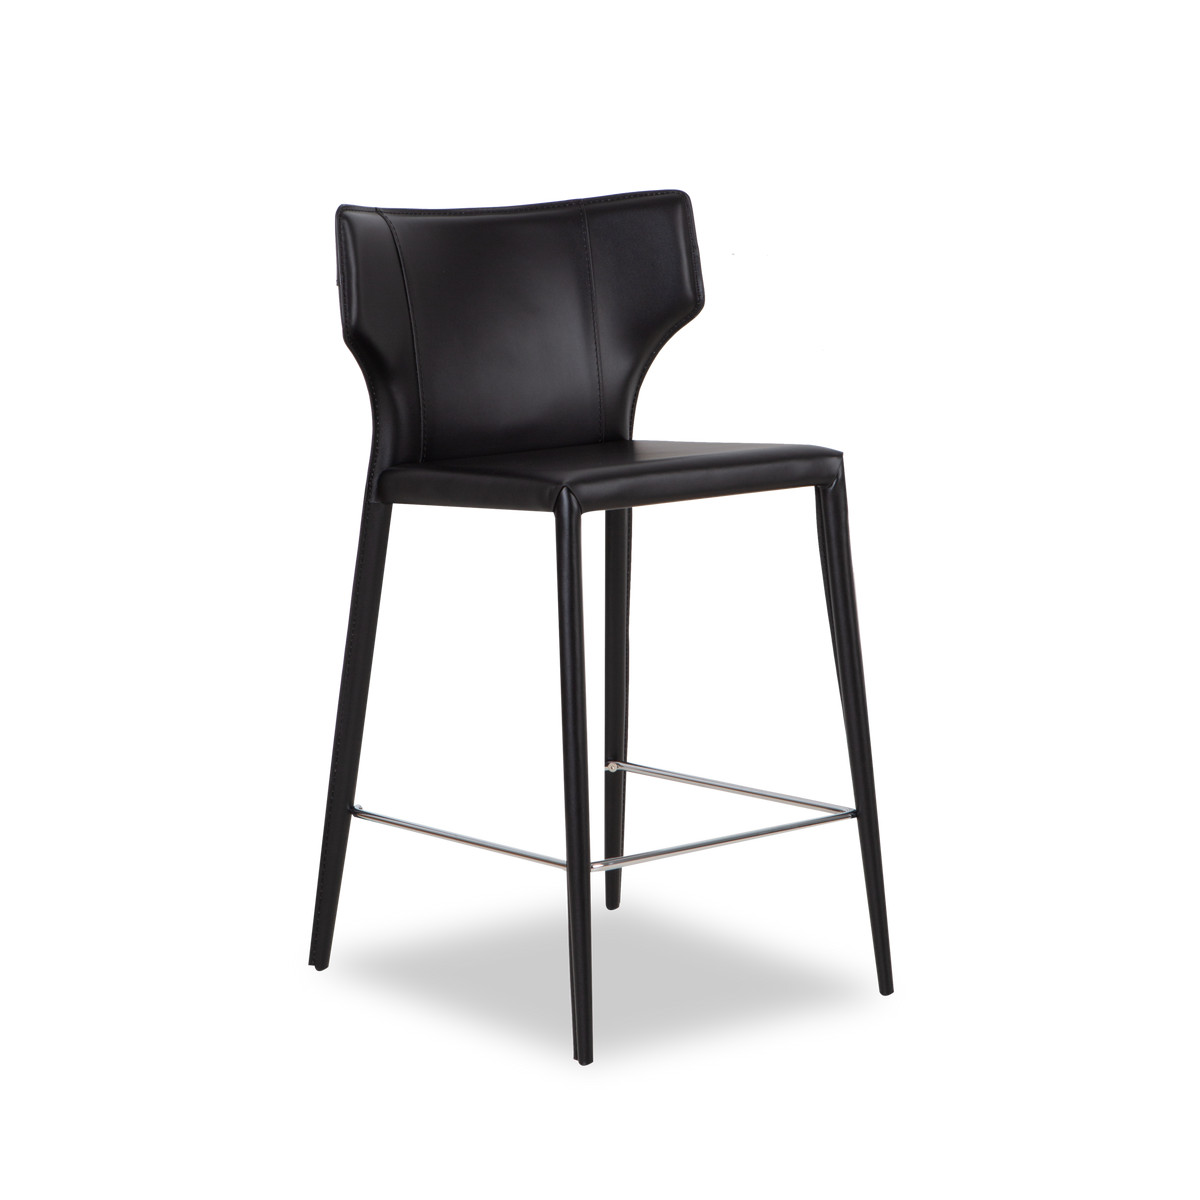 Combining soft curves with sharp angles, the Barnes Counter Stool presents a streamlined design.